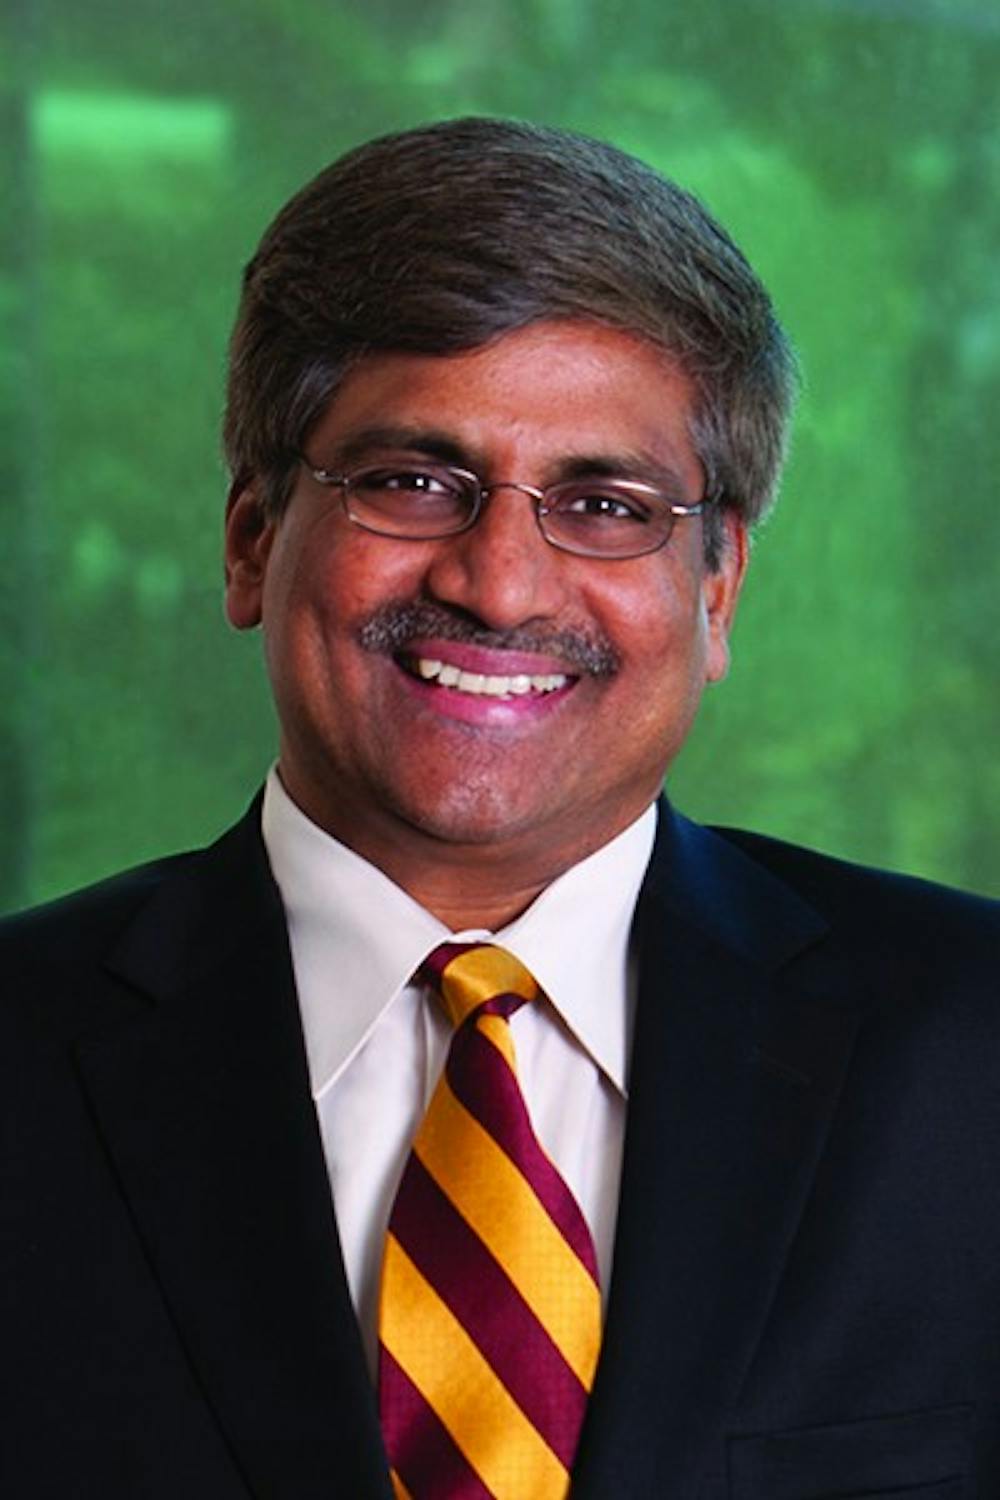 Sethuraman “Panch” Panchanathan, the senior vice president of the Office of Knowledge and Enterprise Development, said the organization is indicative of the potential ASU has as a contender for building innovative technologies in the future. (Photo Courtesy of Dan Vermillion)